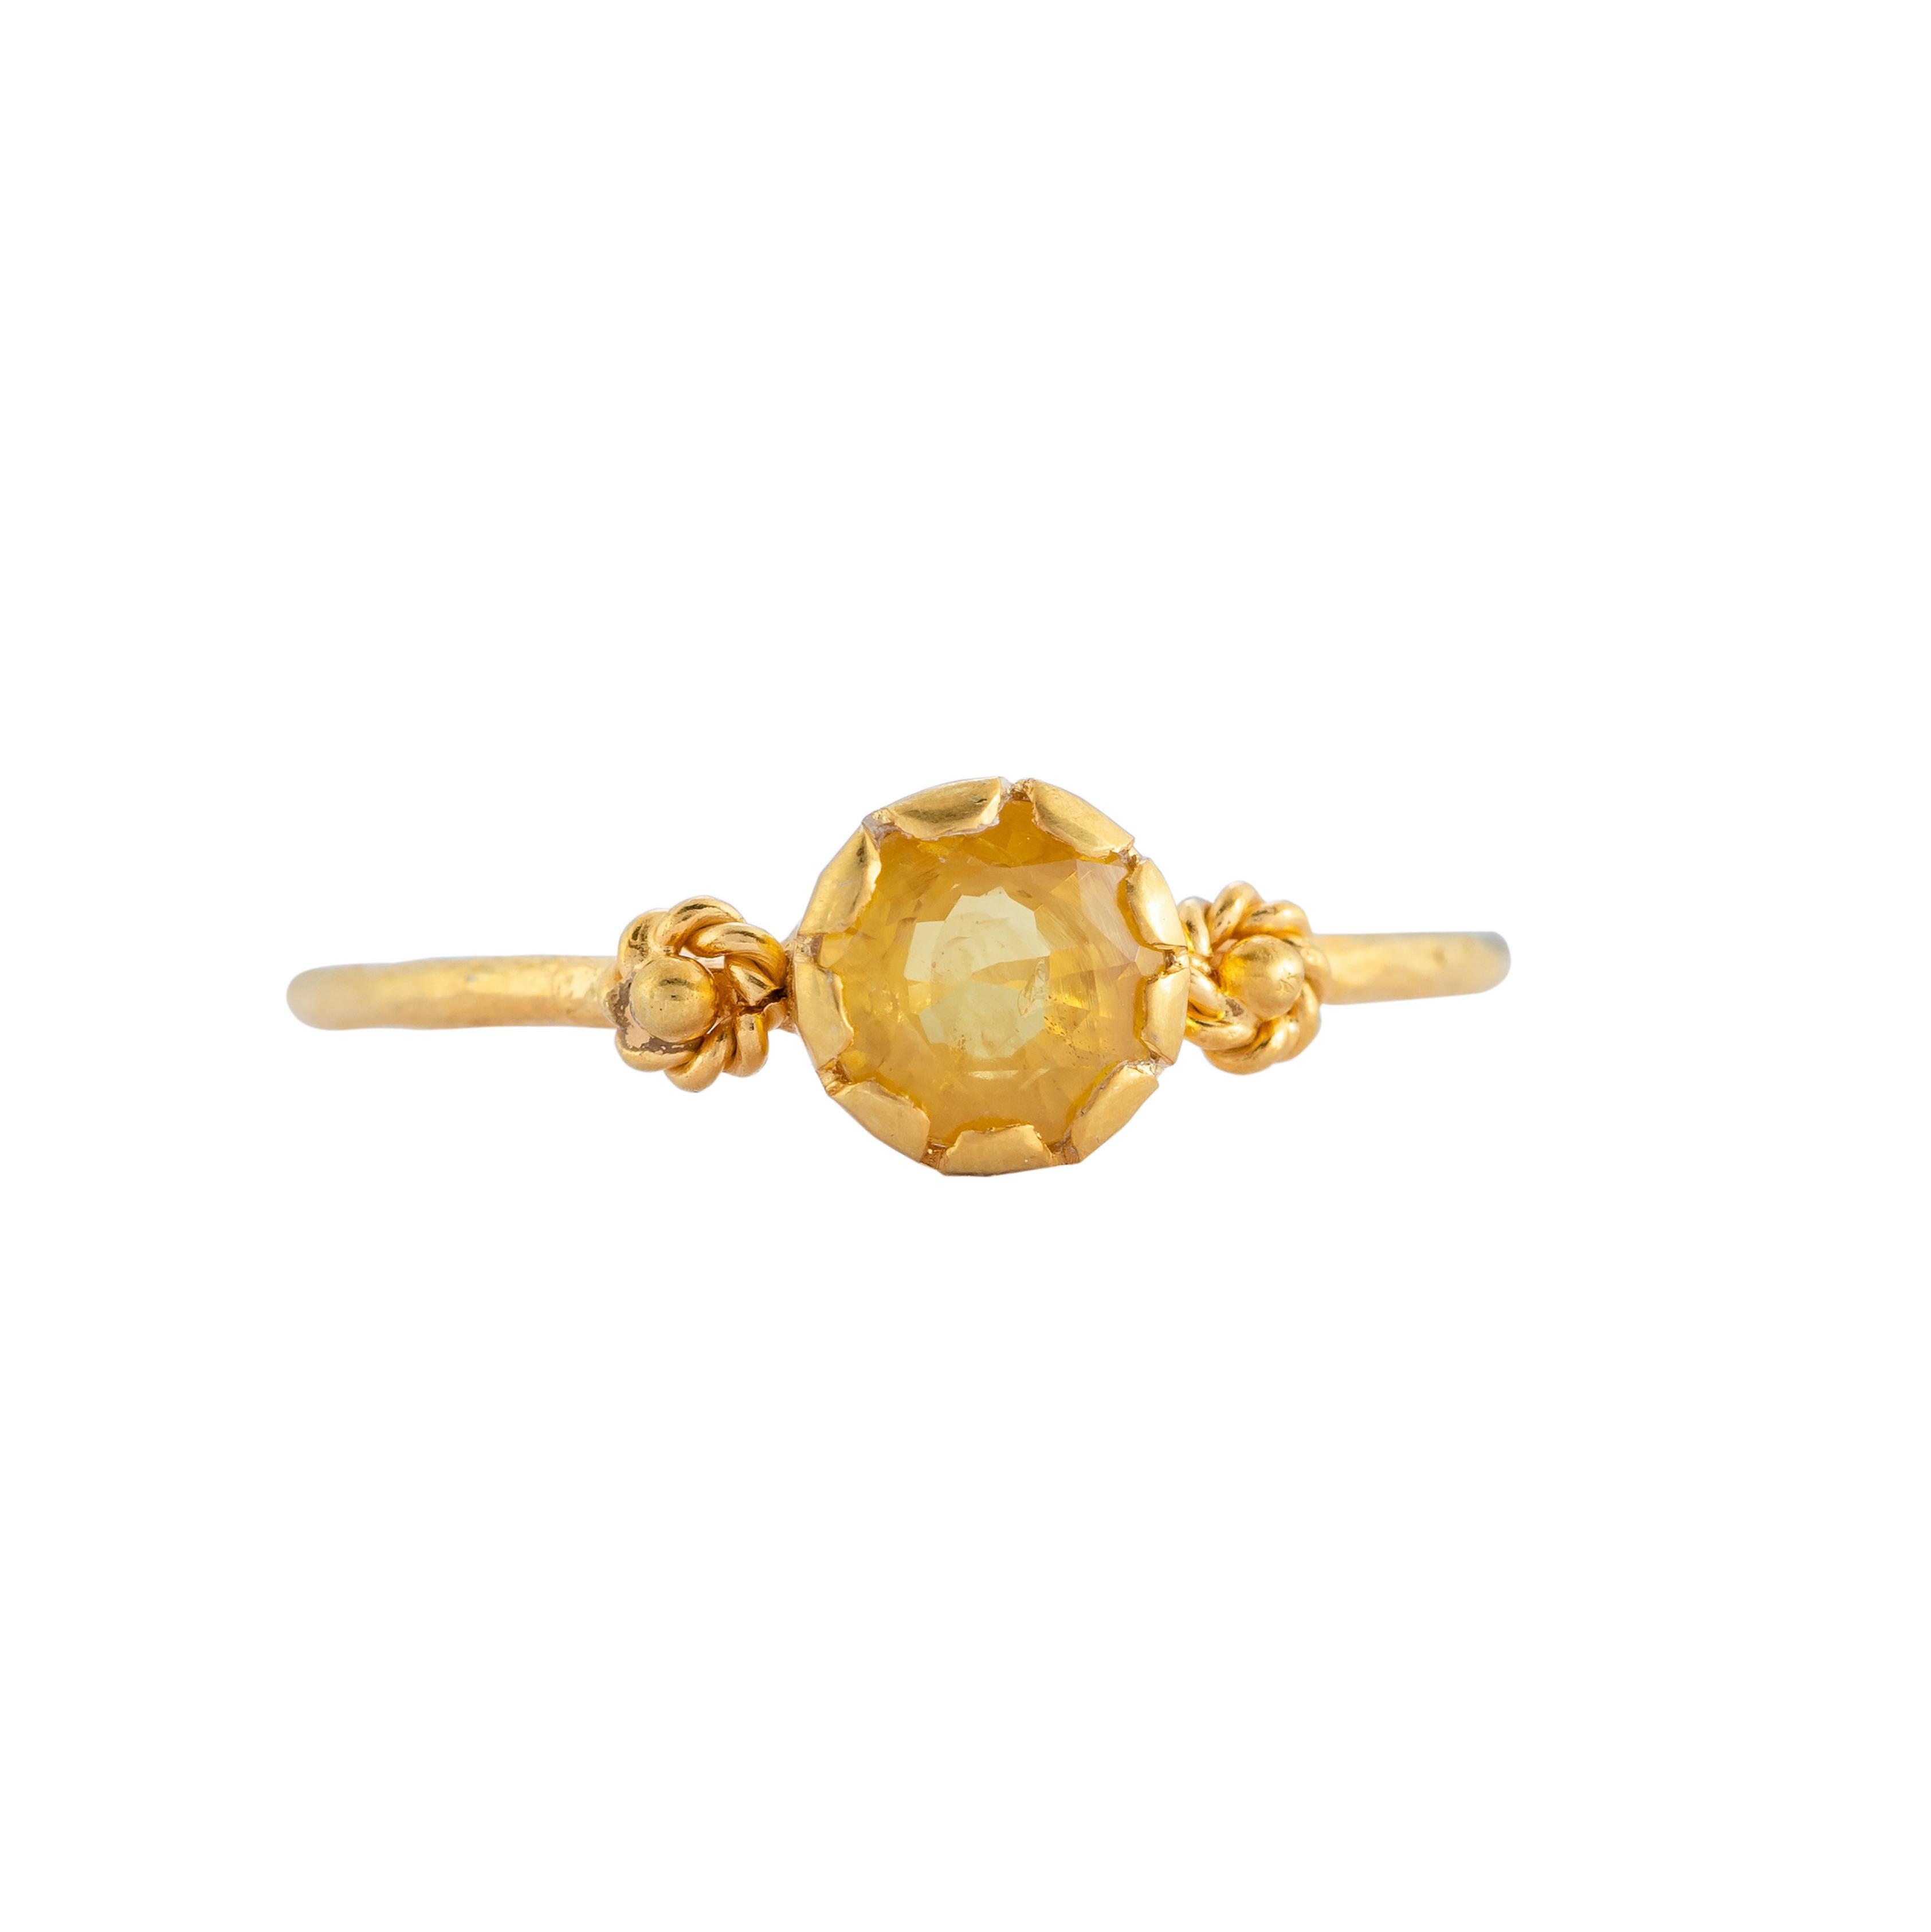 This lovely one-of-a-kind yellow sapphire 14k gold stacking ring, has been handmade in our workshops. It is embedded with a yellow sapphire which is flanked by embossed work. Wear it on it's own or stacked, whatever your preference.

Ring dimensions